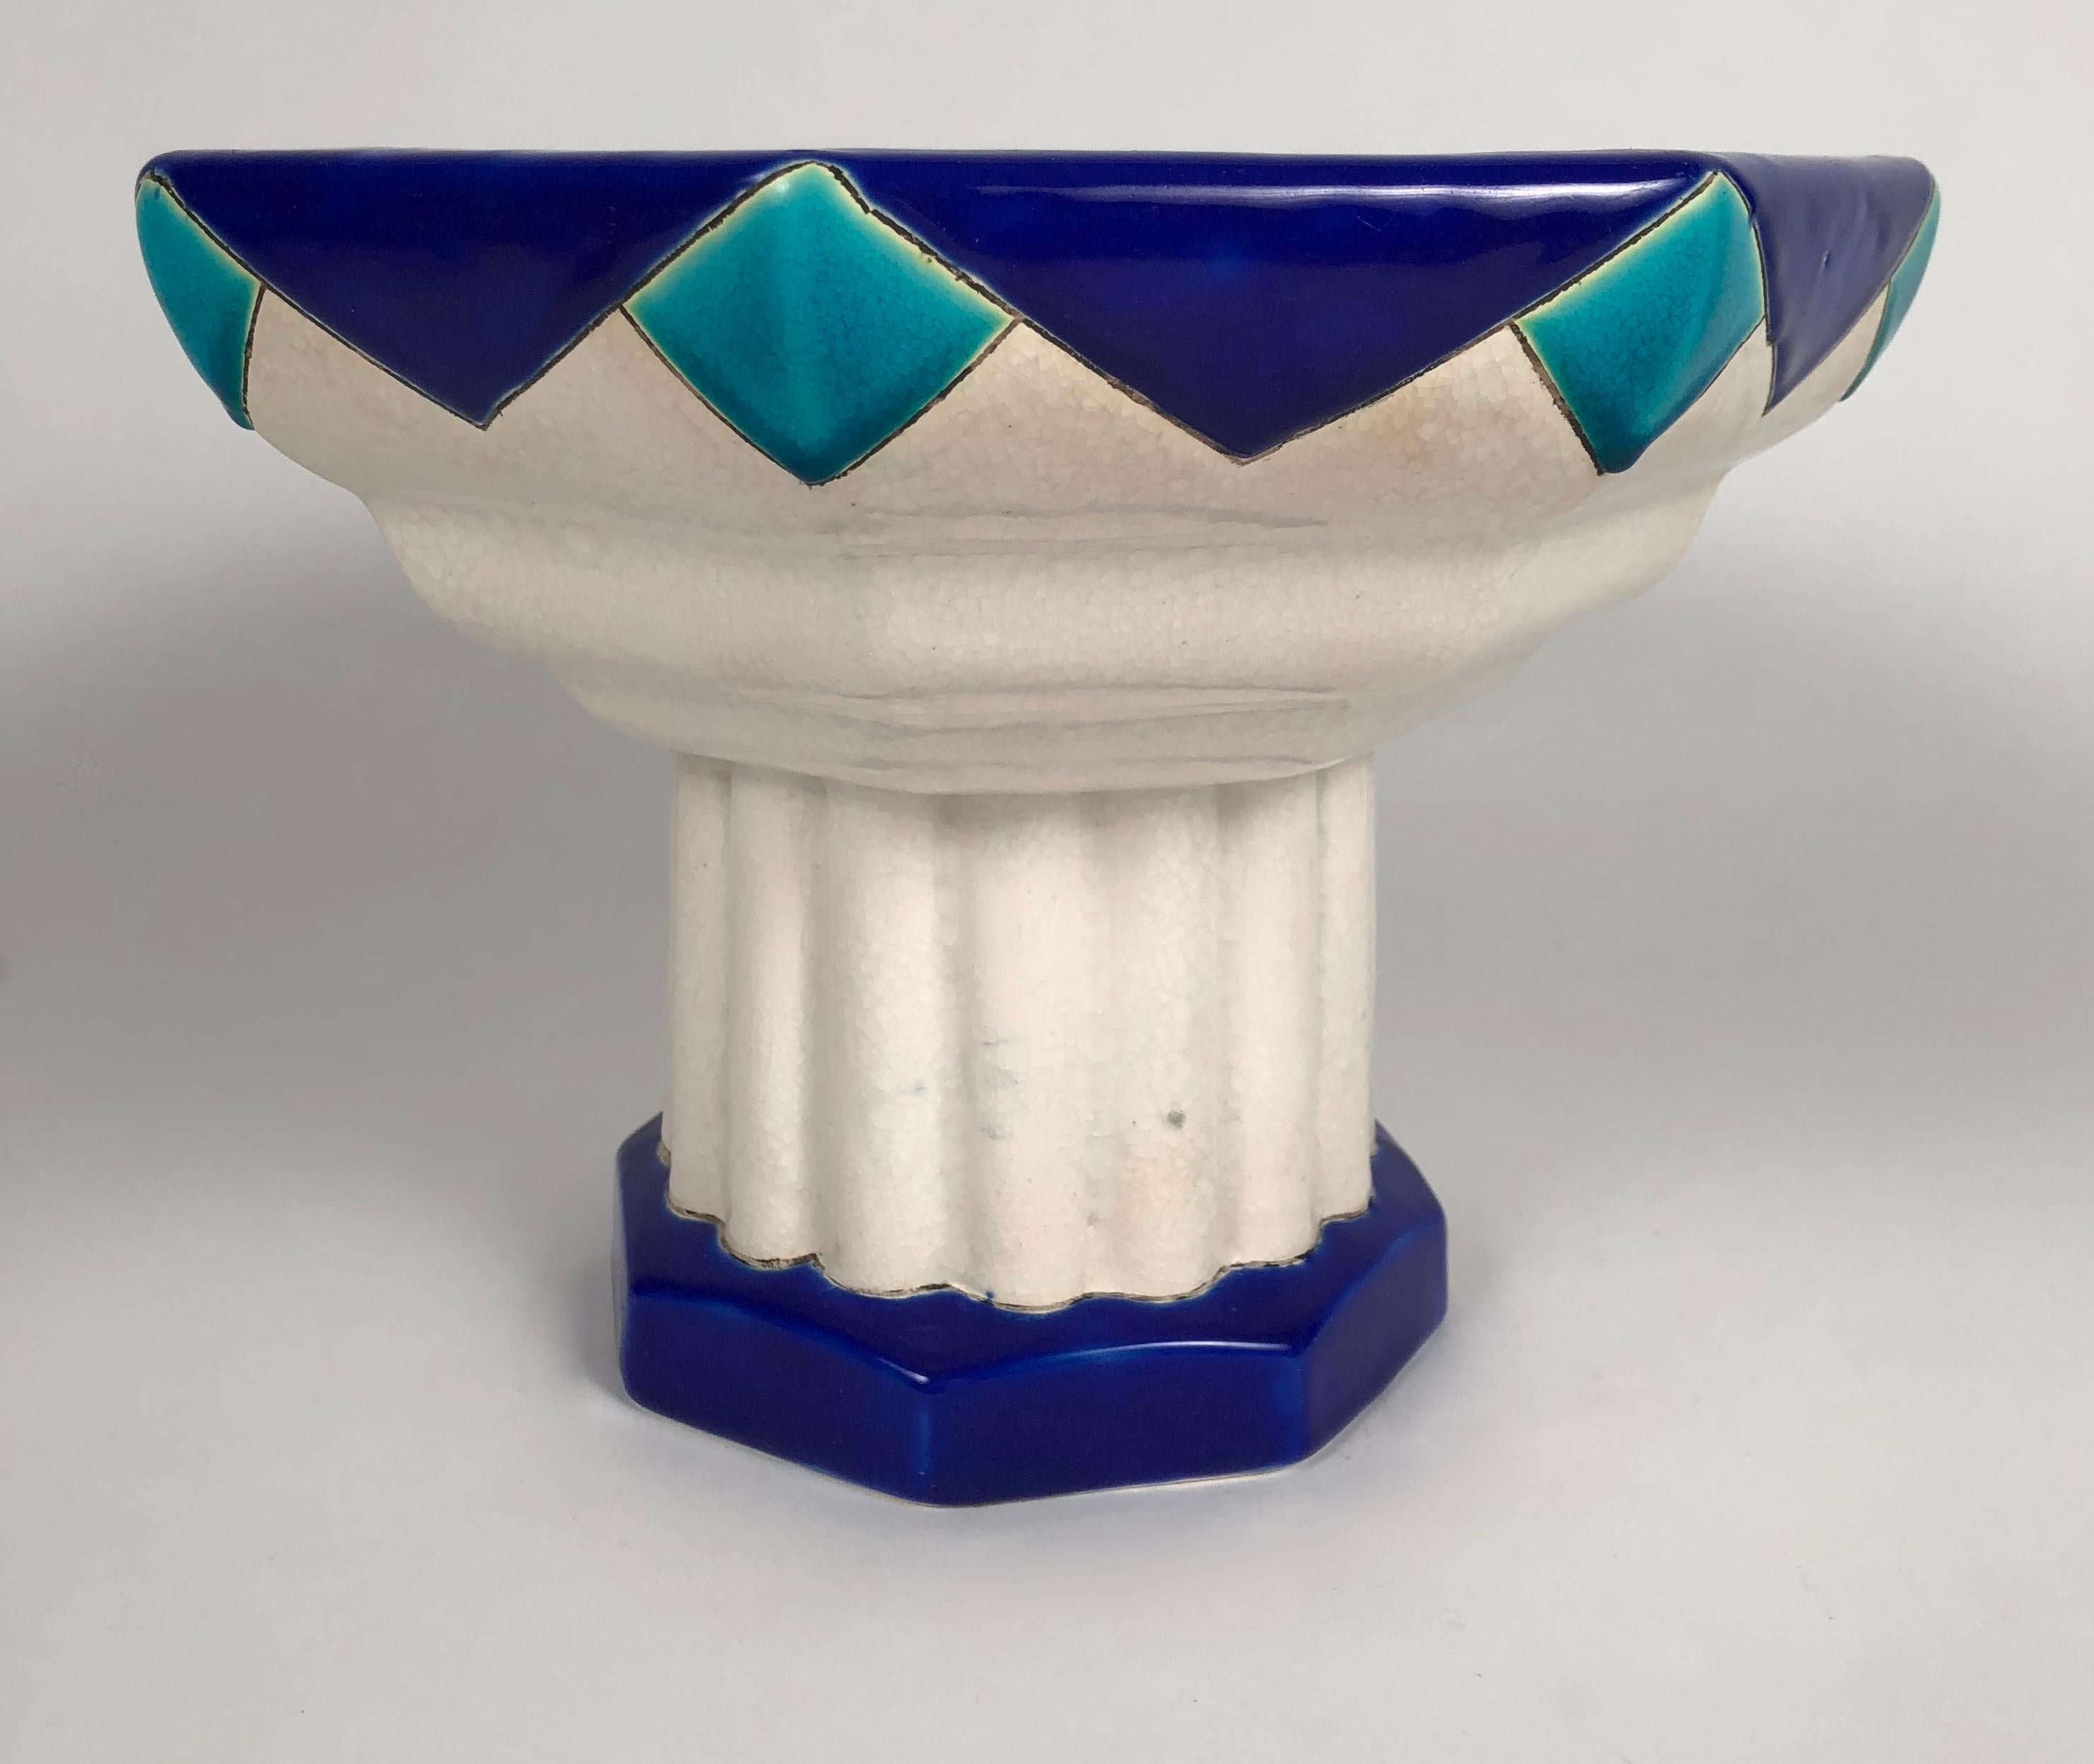 Belgian Art Deco Period Blue Turquoise and White Ceramic Footed Bowl by Boch Frères